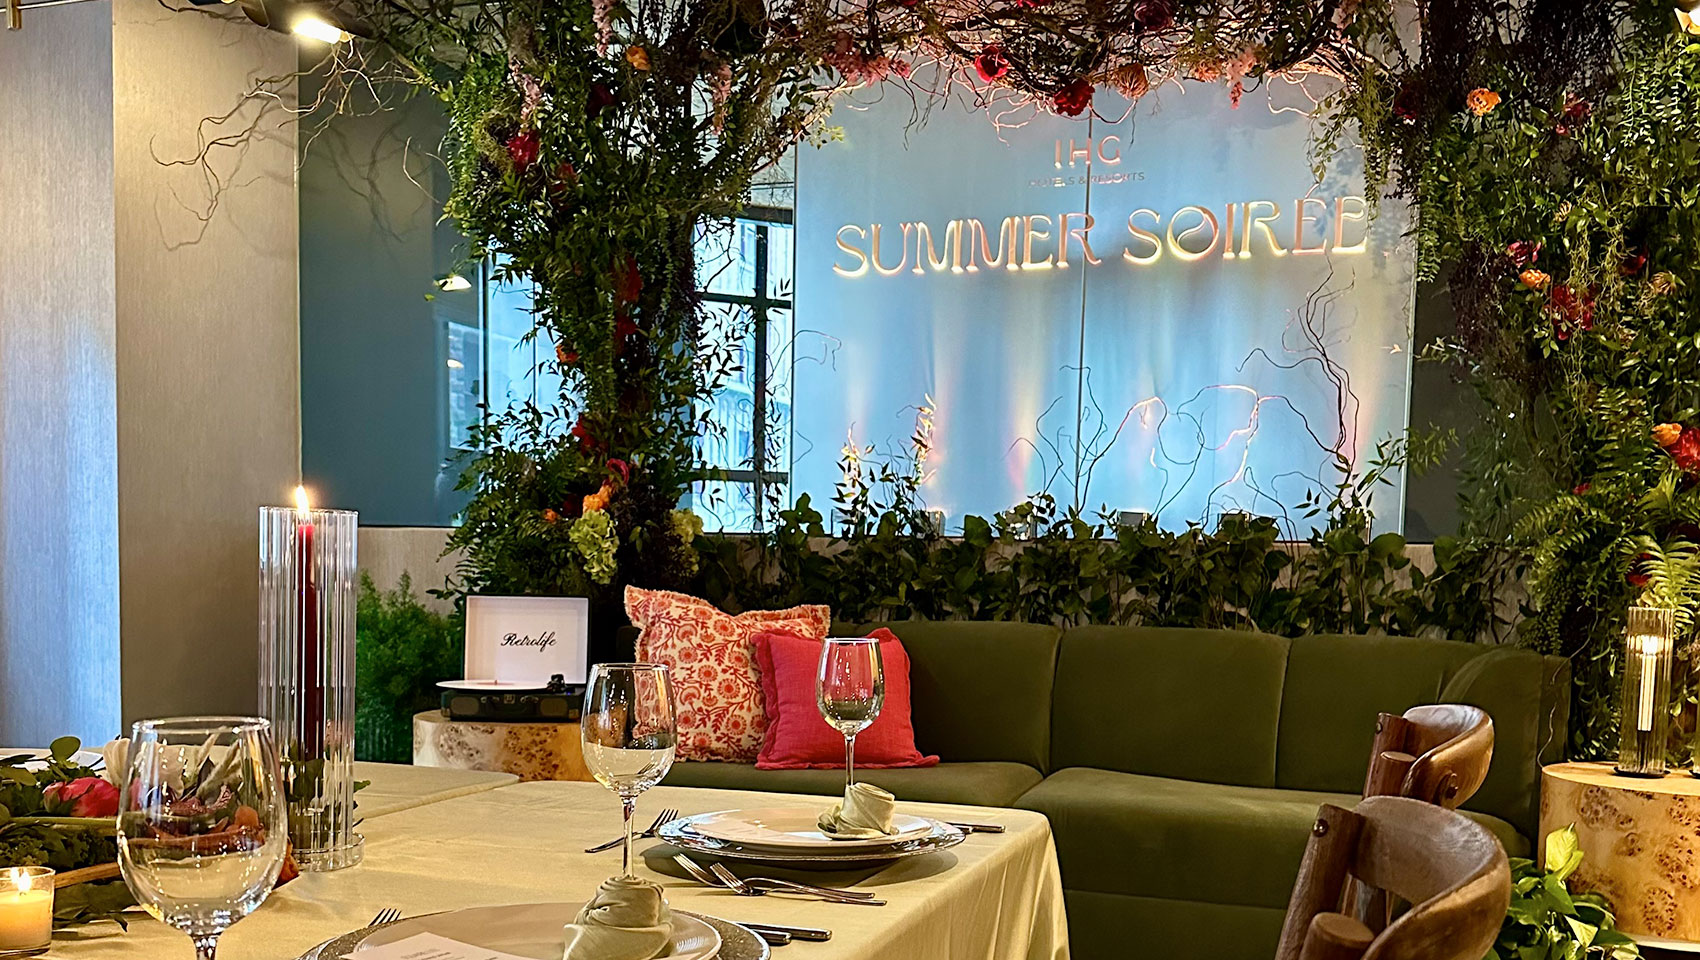 Summer Soiree table and couch set-up